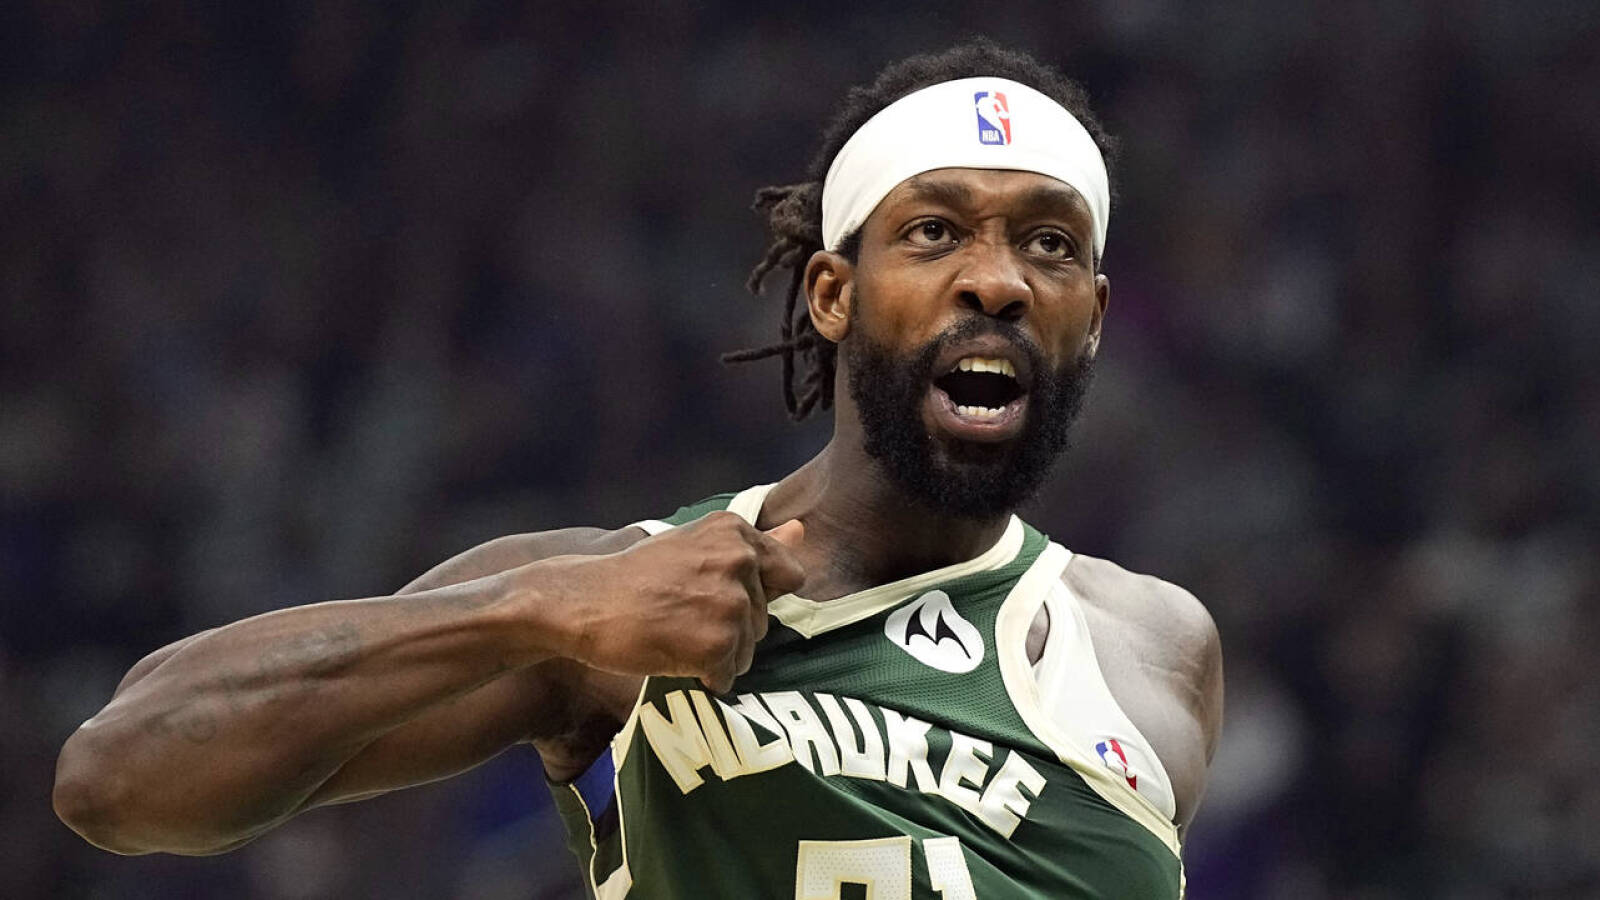 Watch: Bucks' Patrick Beverley throws basketball at Pacers fan